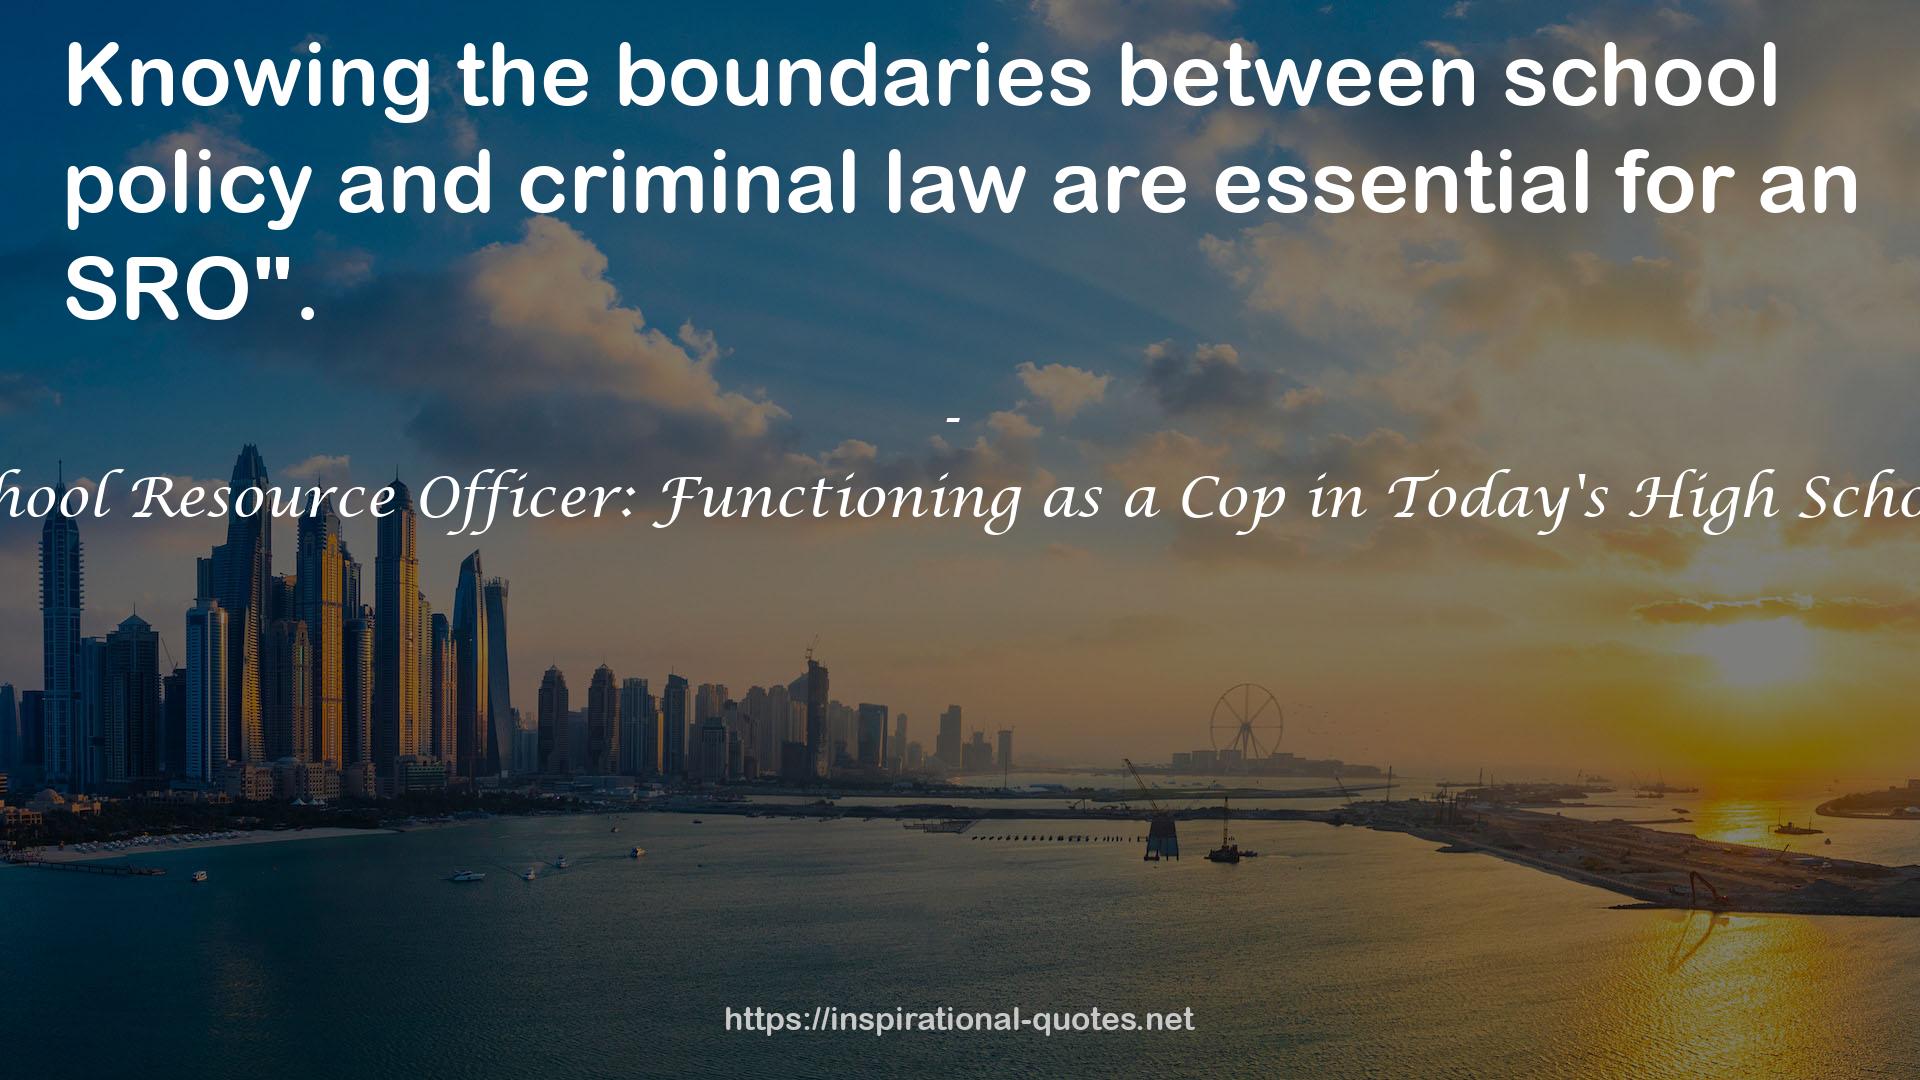 School Resource Officer: Functioning as a Cop in Today's High School QUOTES